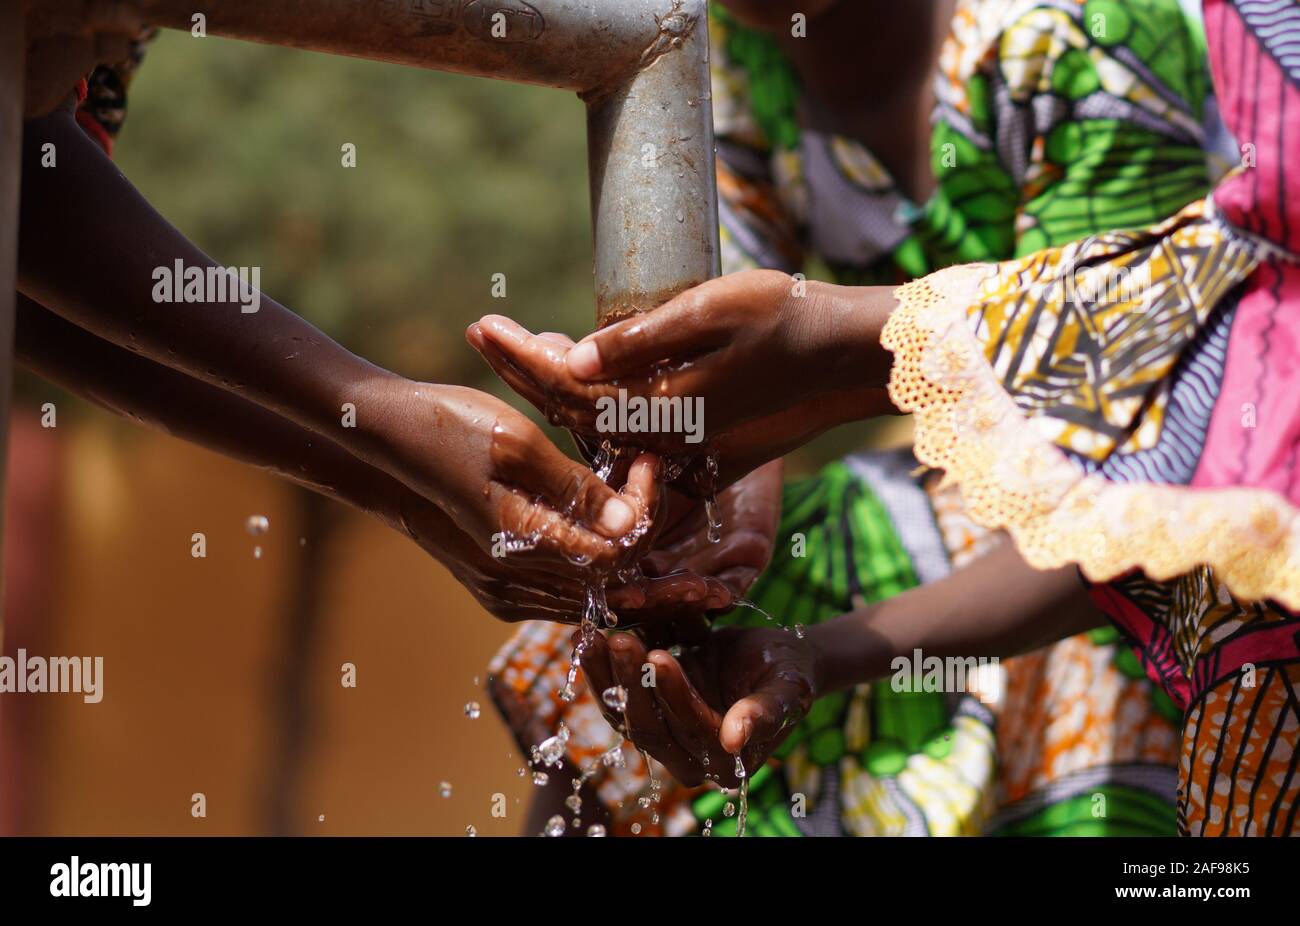 Hands under Tap from African Black Children with Fresh Clean Water Stock Photo